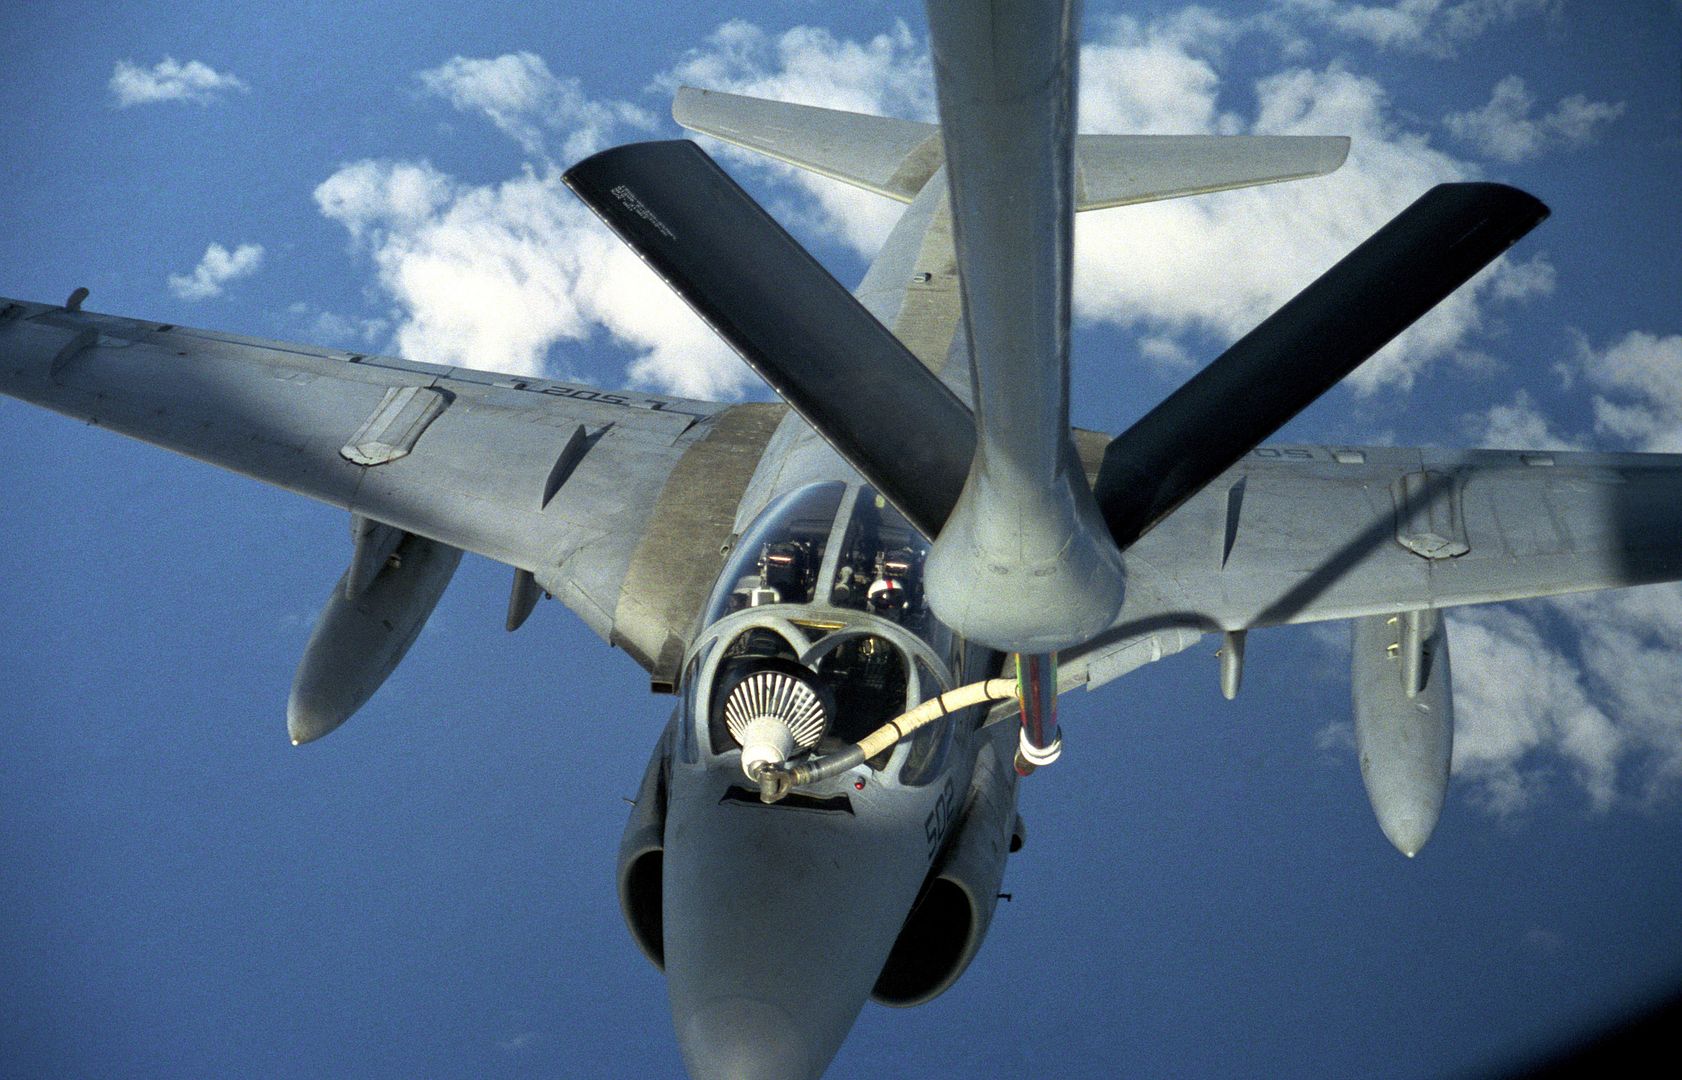 A US Navy A 6E Intruder Connects With The Refueling Drogue From The Boom Of A US Air Force KC 135 Stratotanker